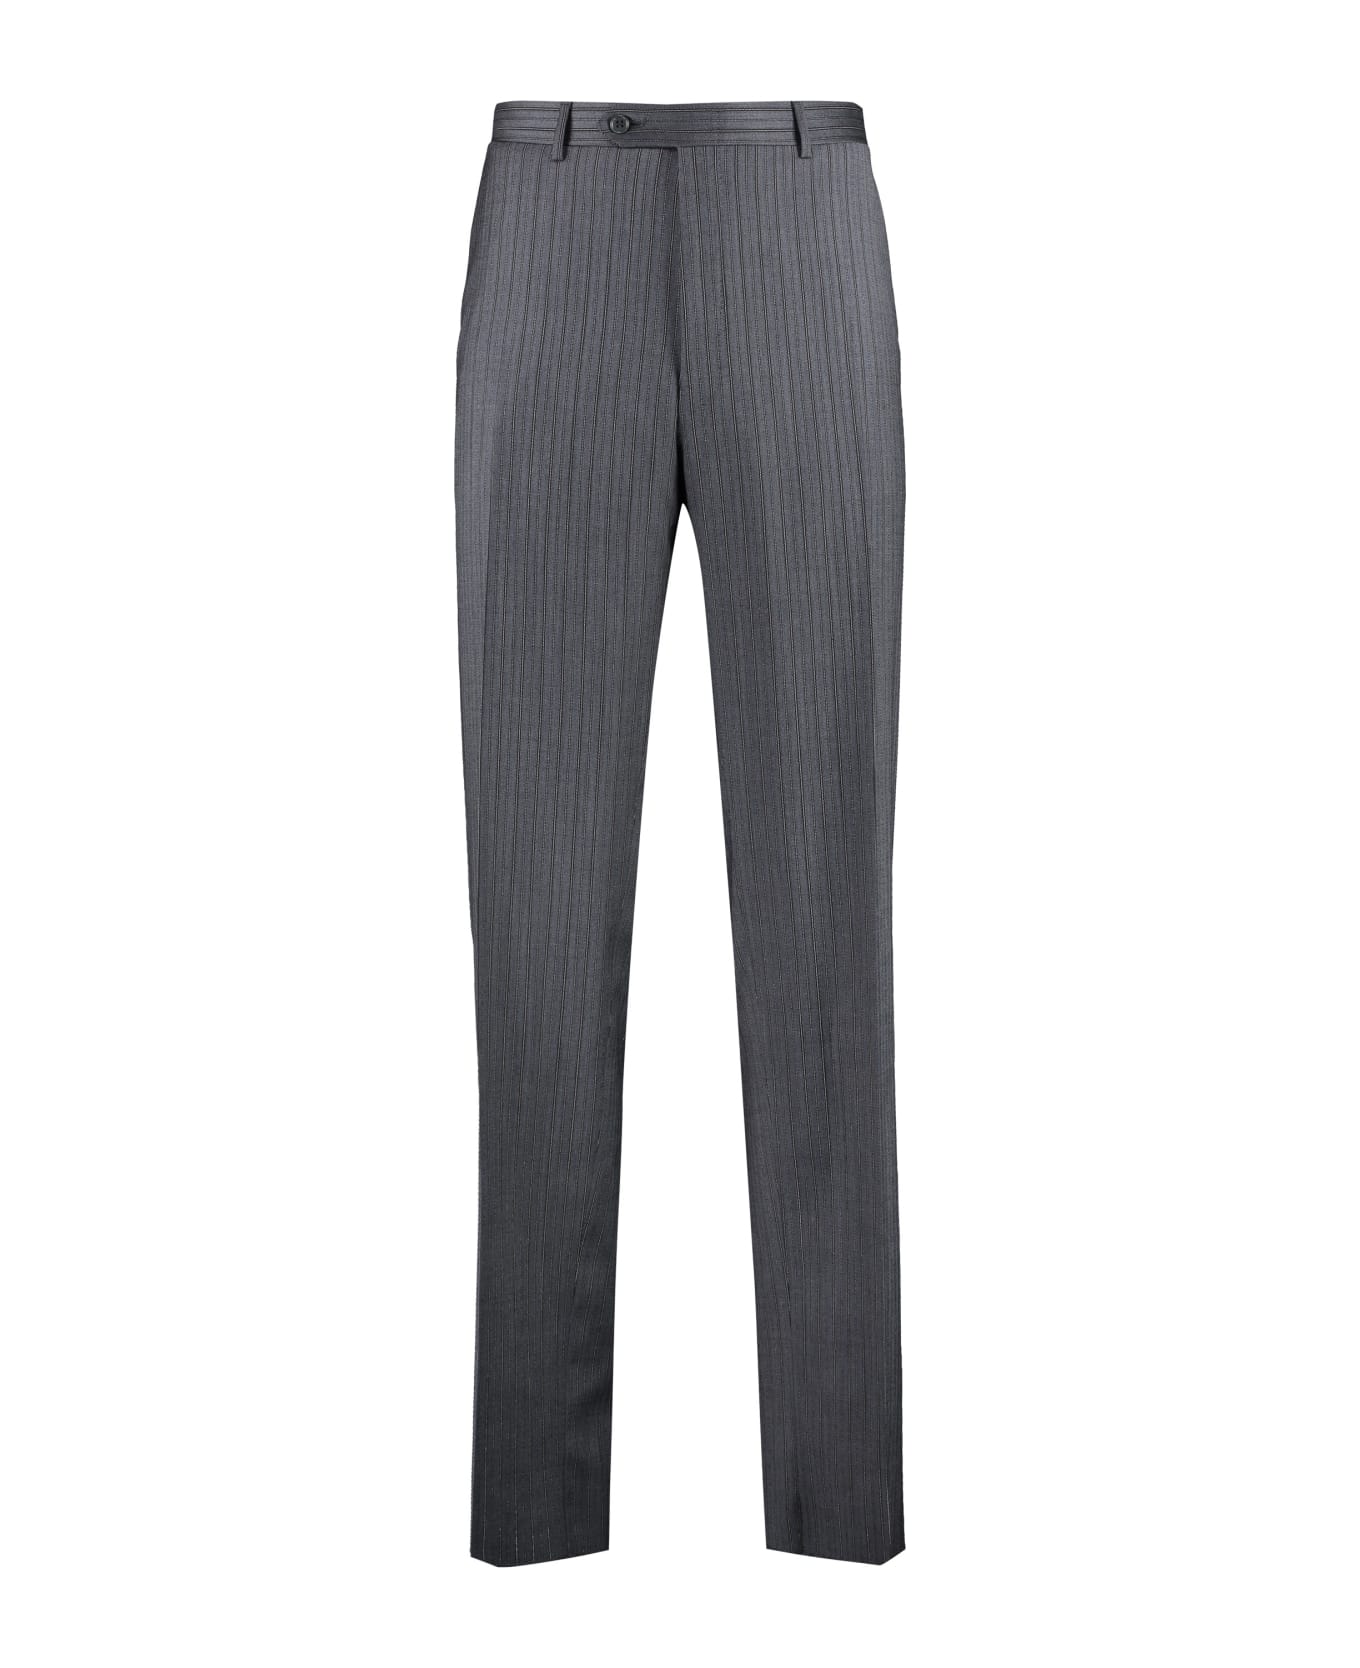 Canali Pin-striped Wool Tailored Trousers - grey